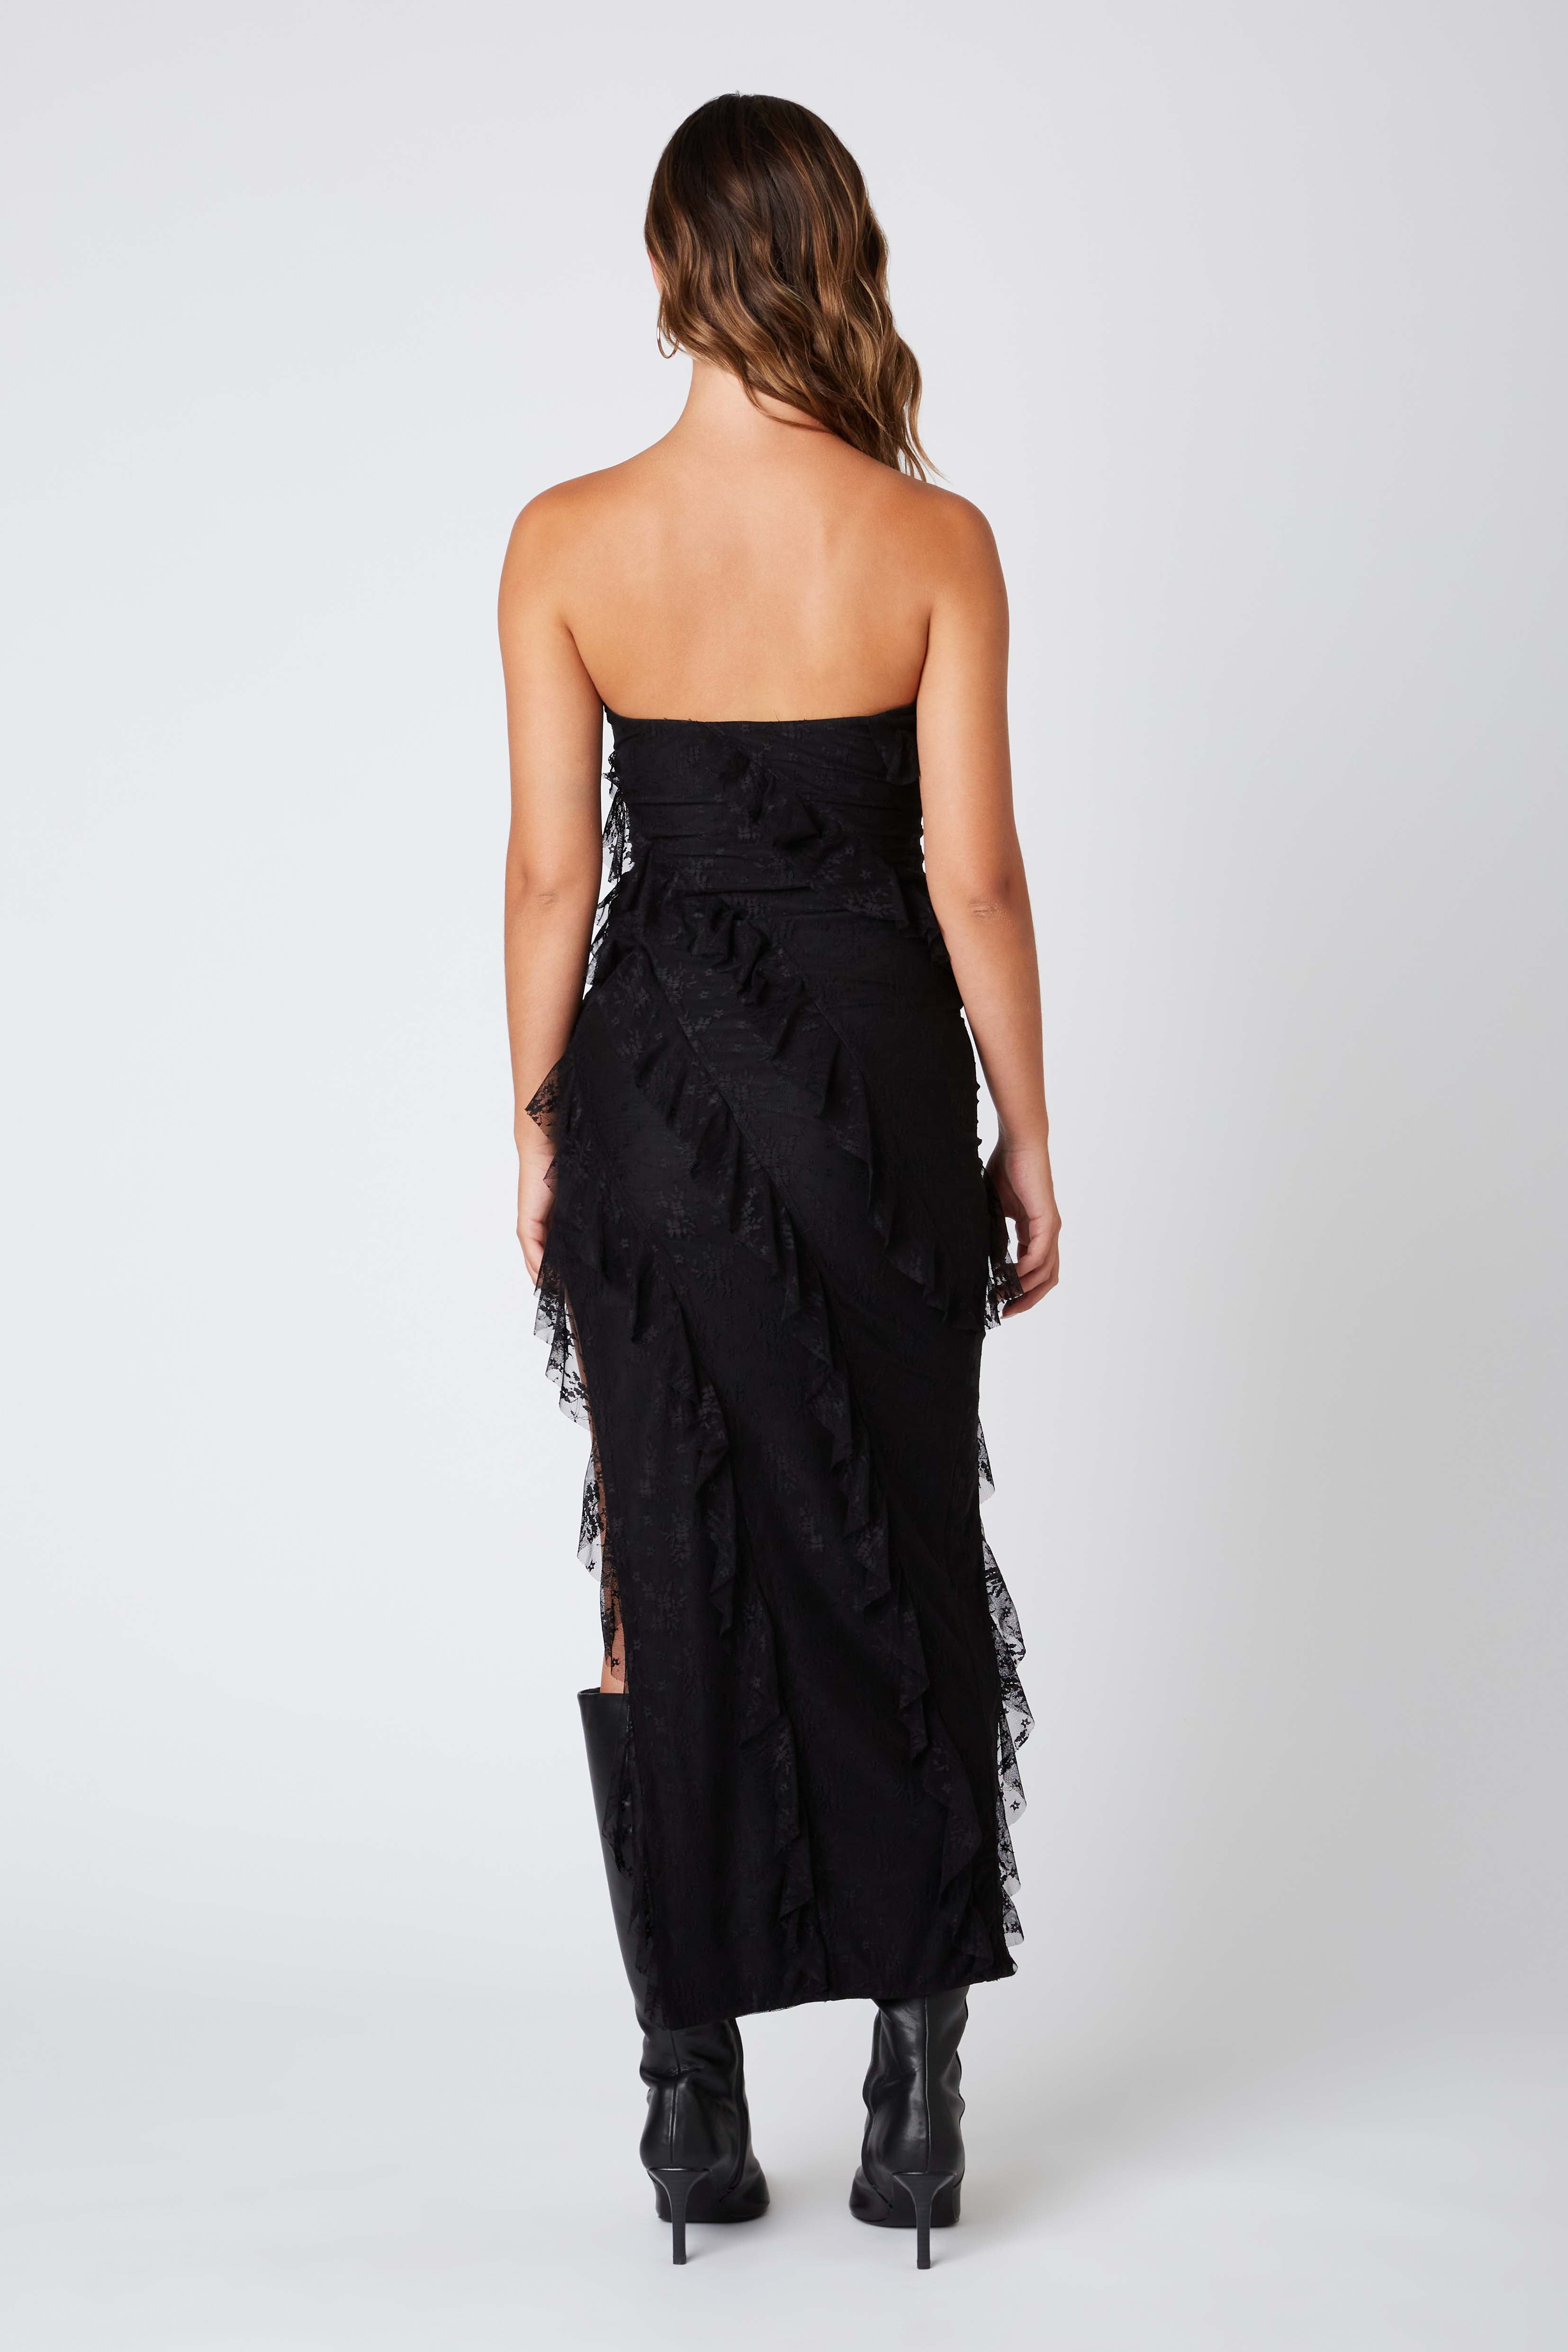 Lace Strapless Maxi Dress in Black Back View